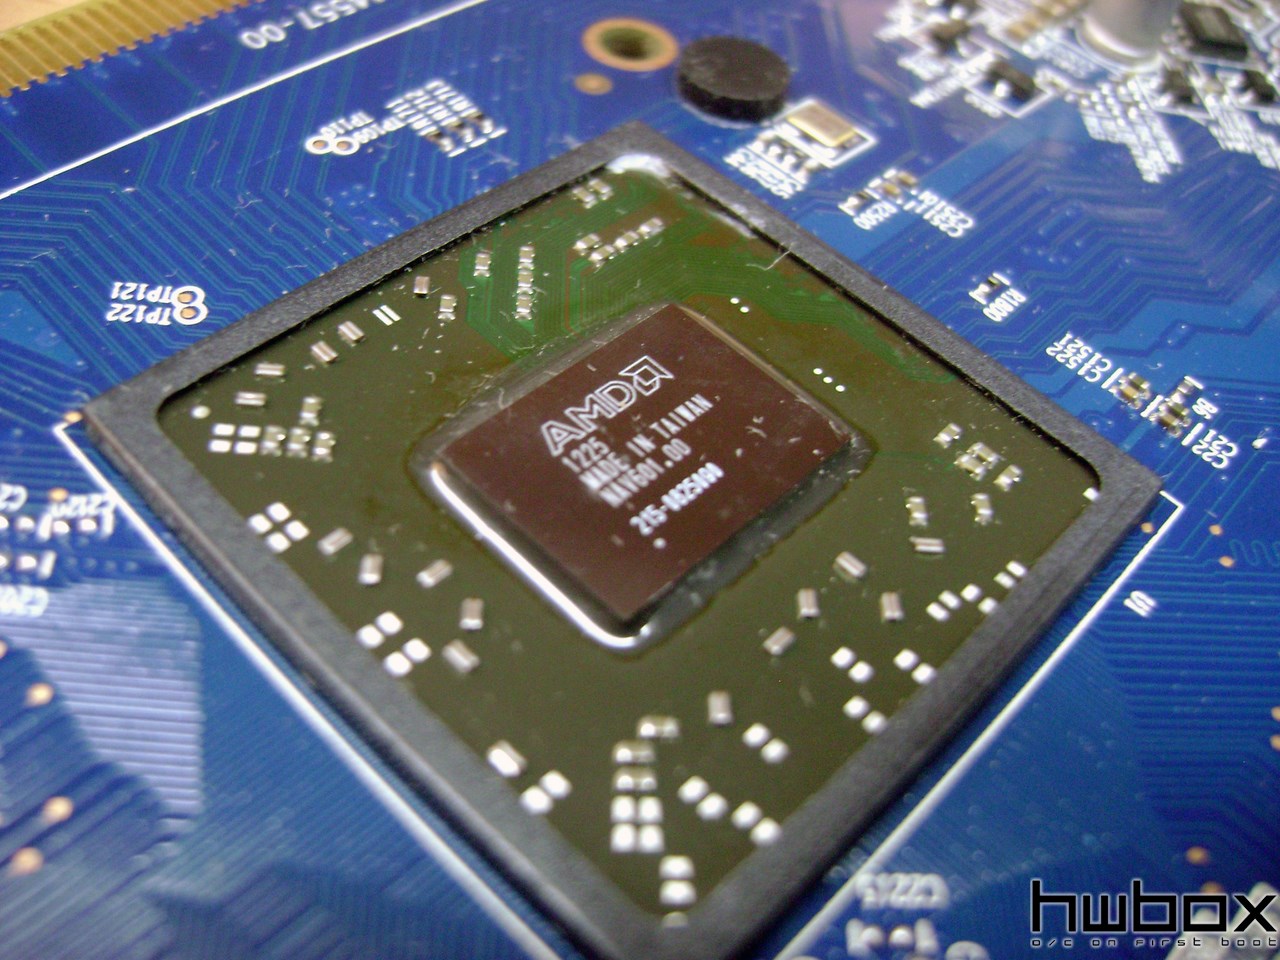 Sapphire HD 7730 Review: Low budget gaming